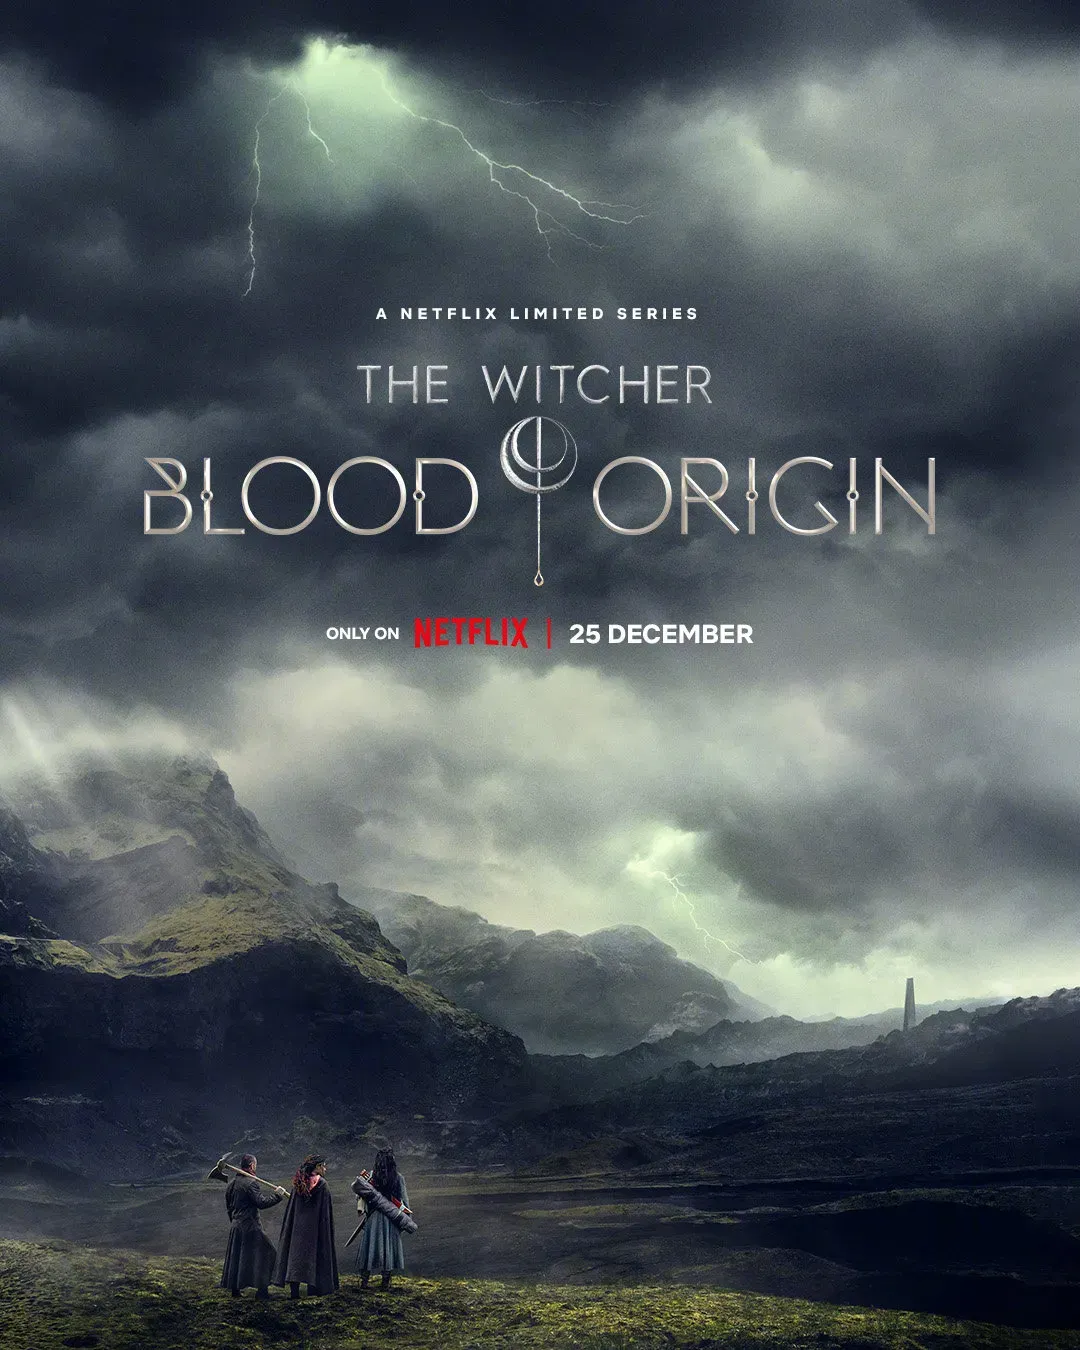 'The Witcher' prequel series 'The Witcher: Blood Origin‎' released official trailer | FMV6